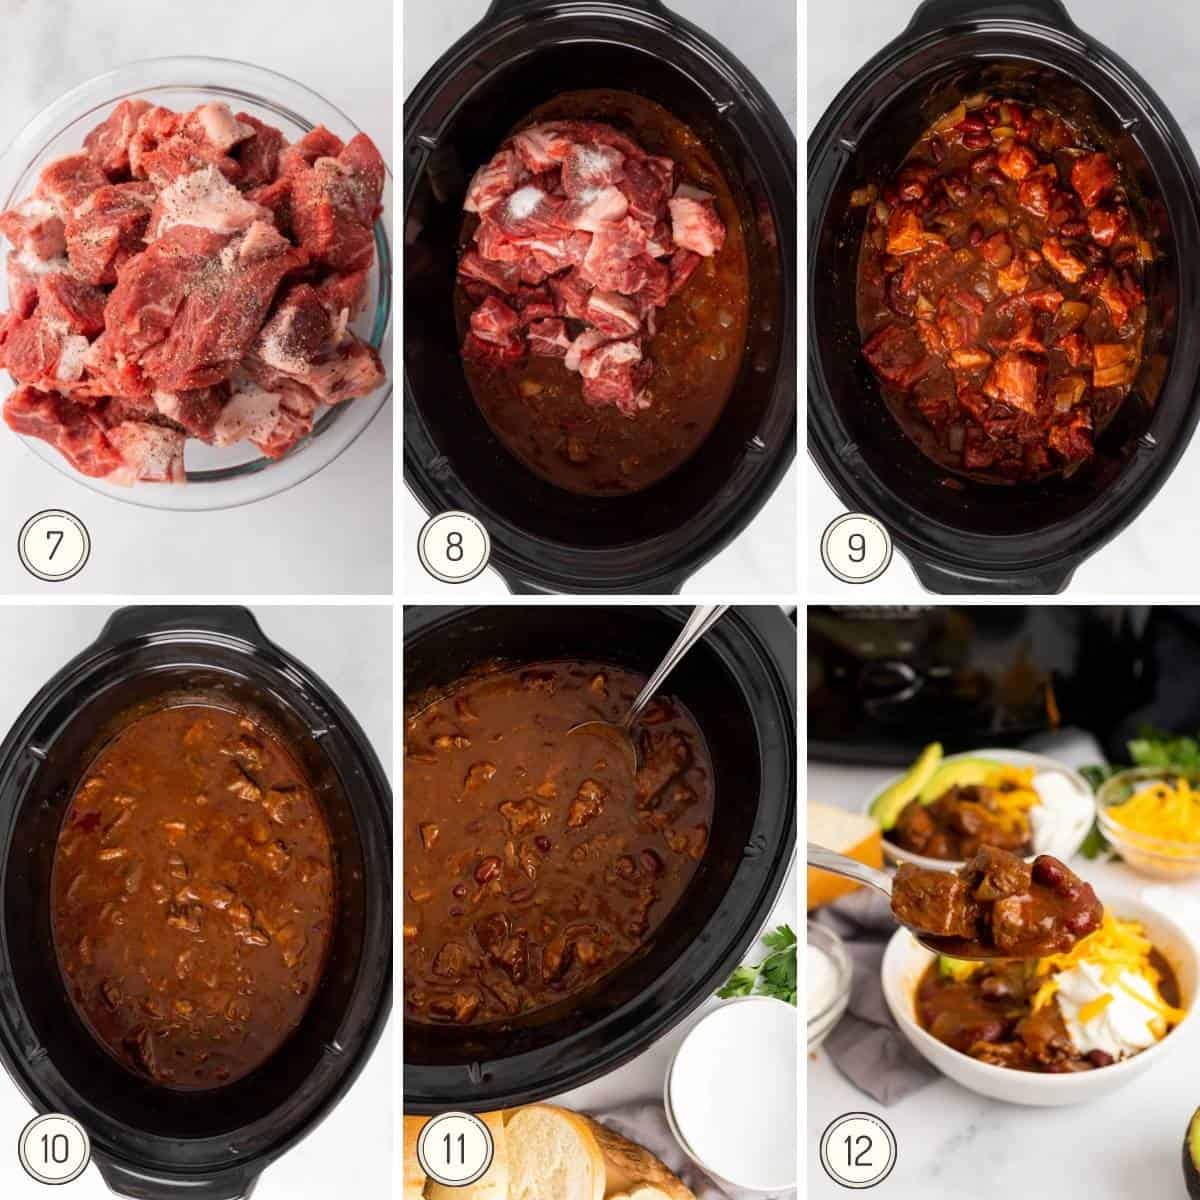 another step by step collage finishing the slow cooker chuck roast recipe.